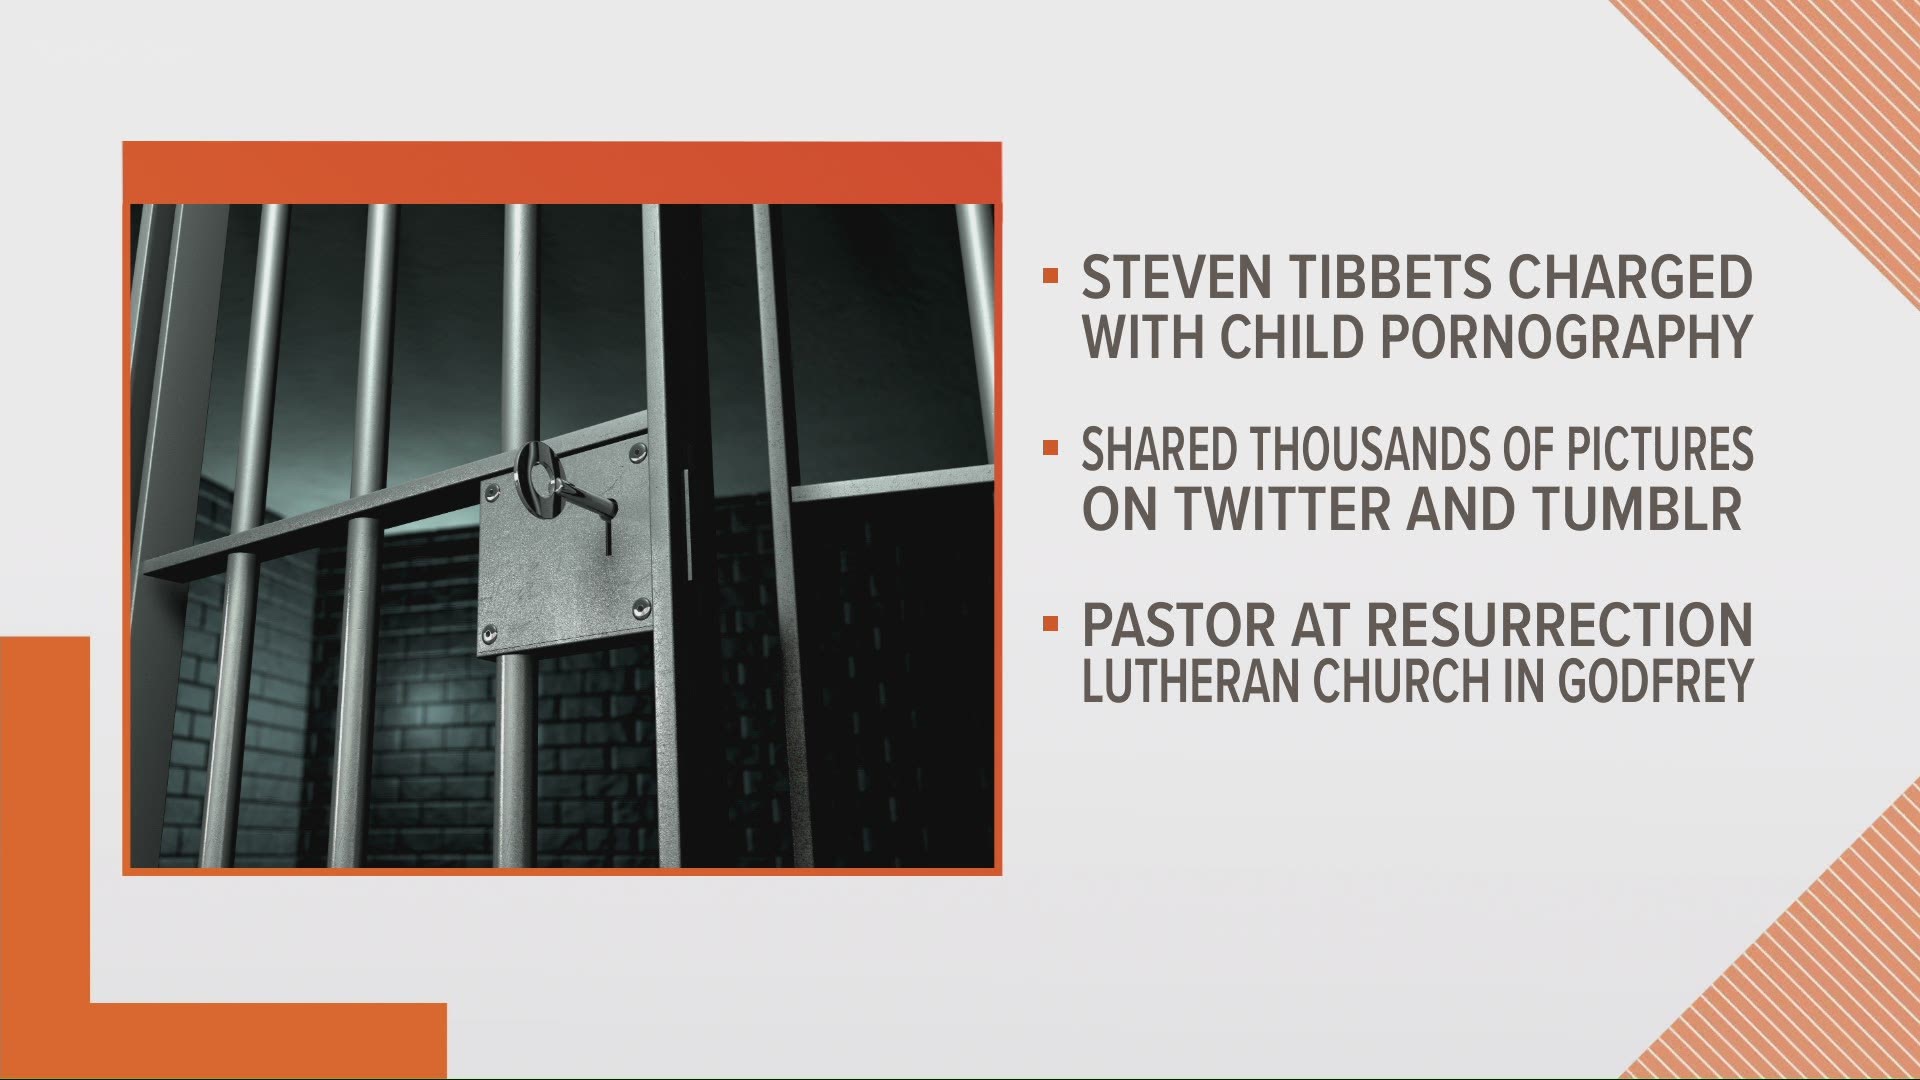 Steven Tibbets is accused of sharing videos of children on social media accounts.